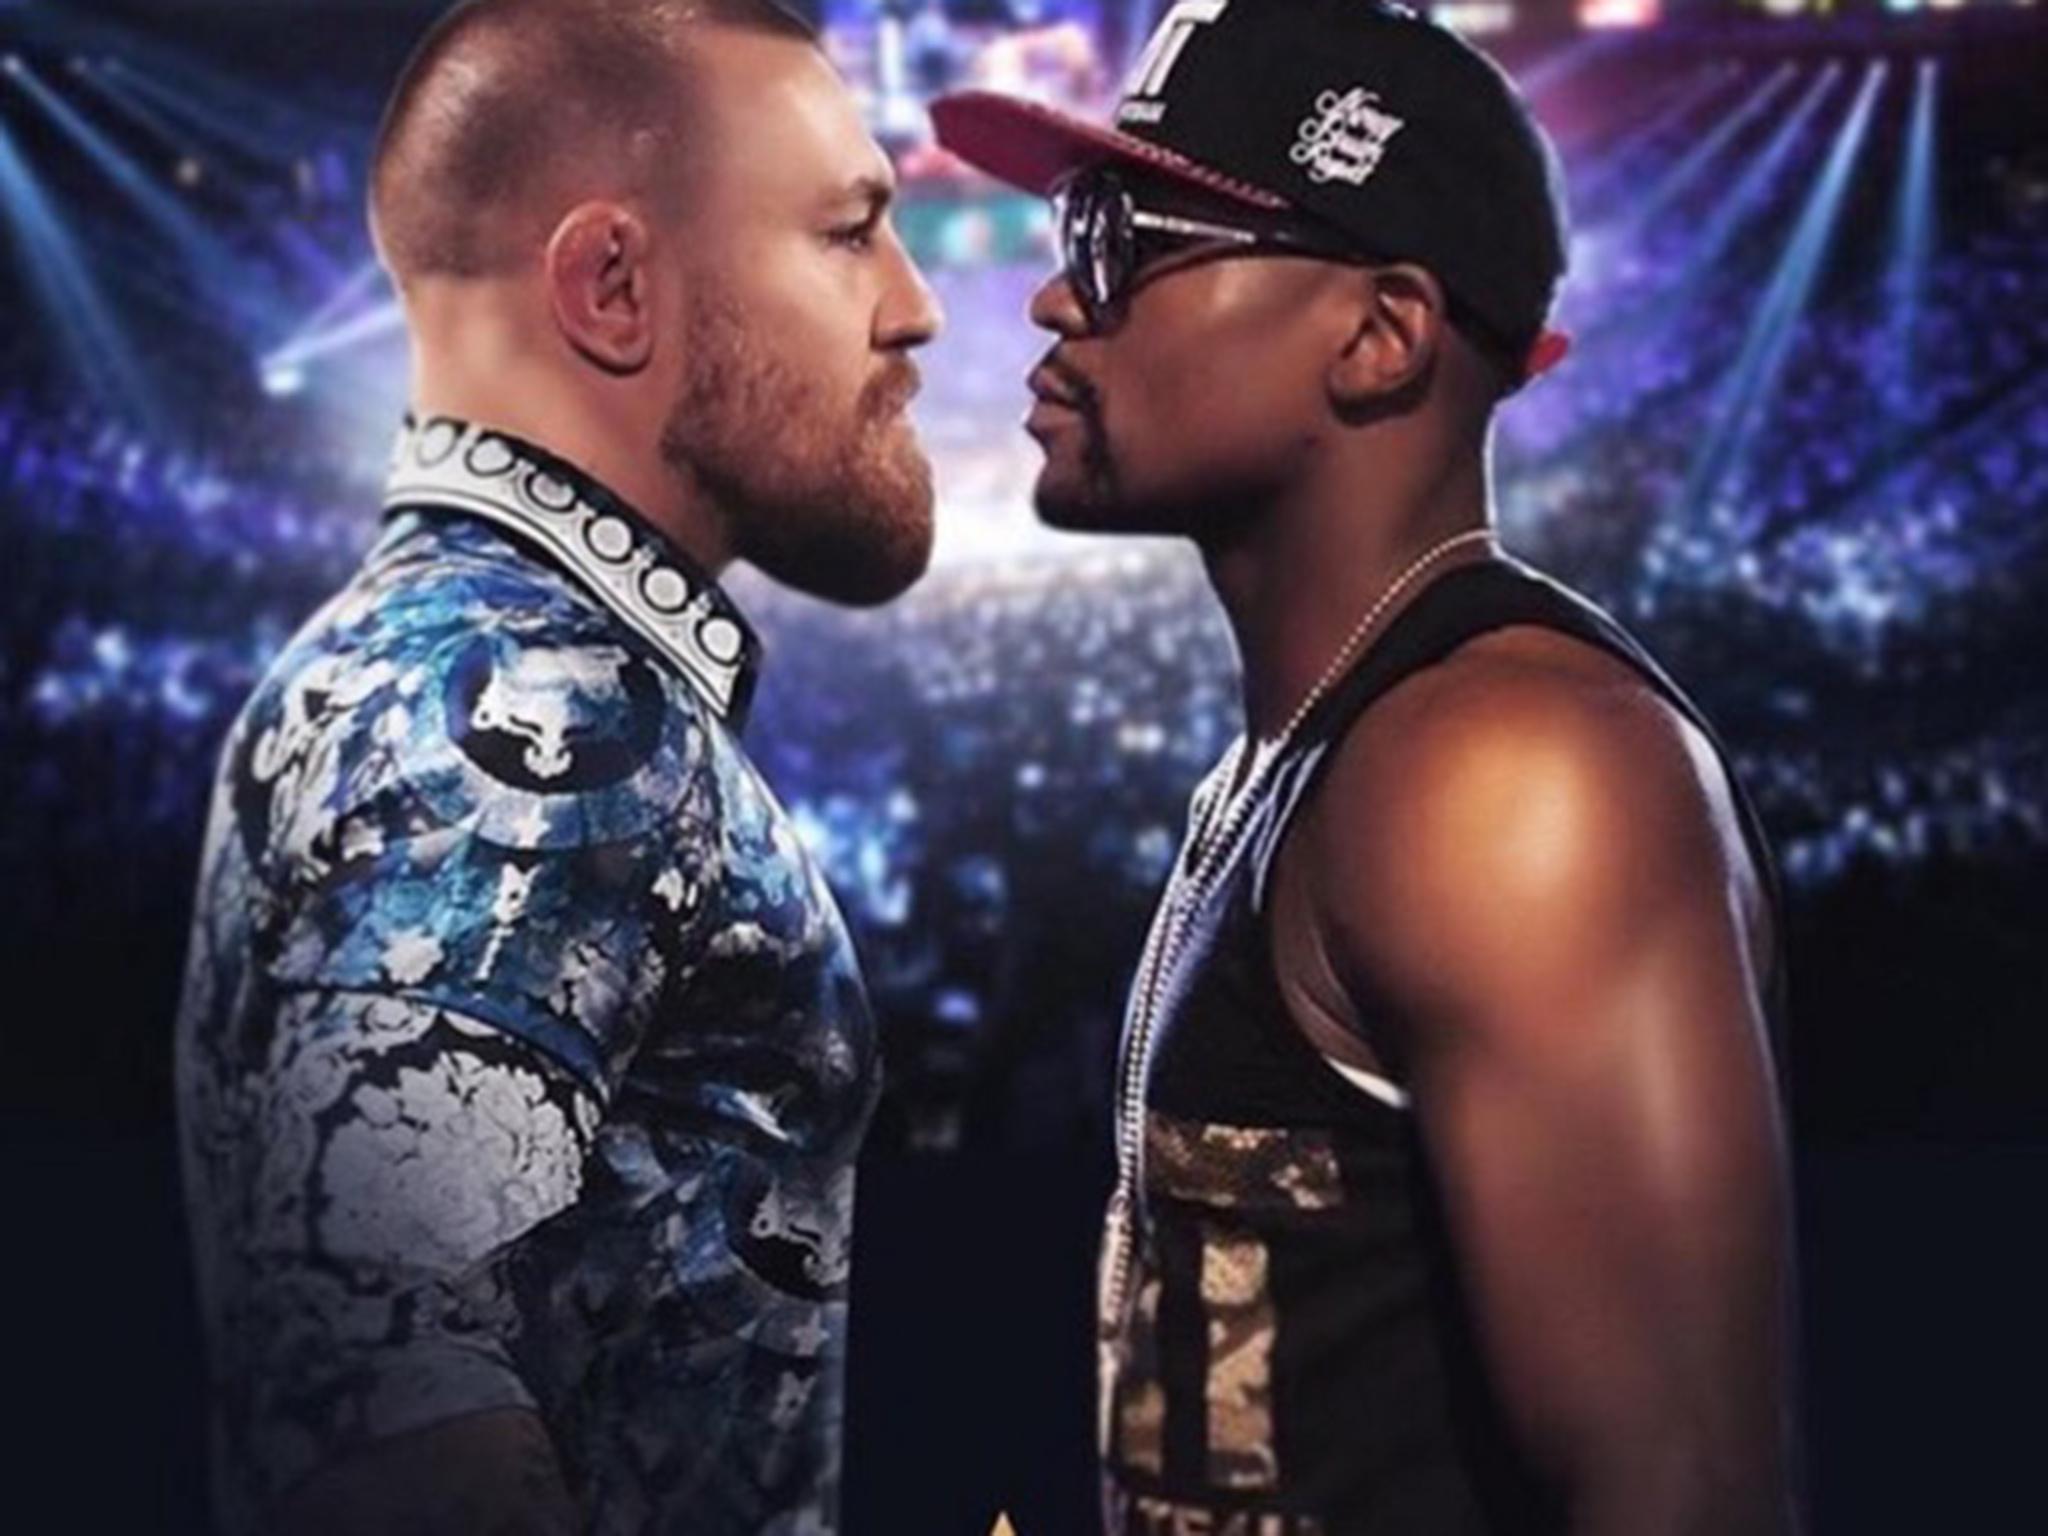 Mocked-up picture uploaded by Conor McGregor to his Twitter account today